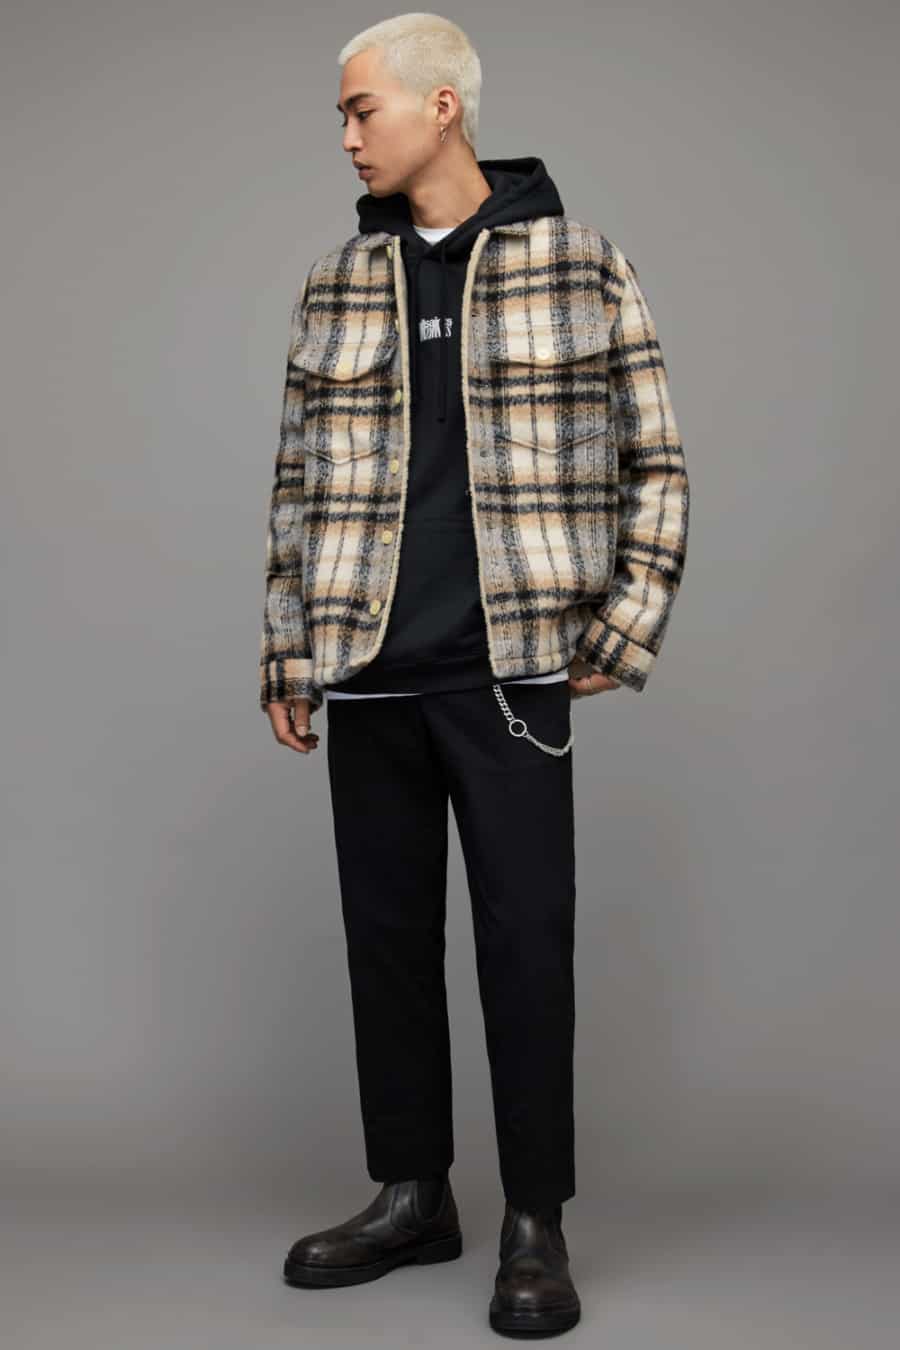 Men's black cropped chinos, black hoodie, flannel check overshirt and black Chelsea boots outfit